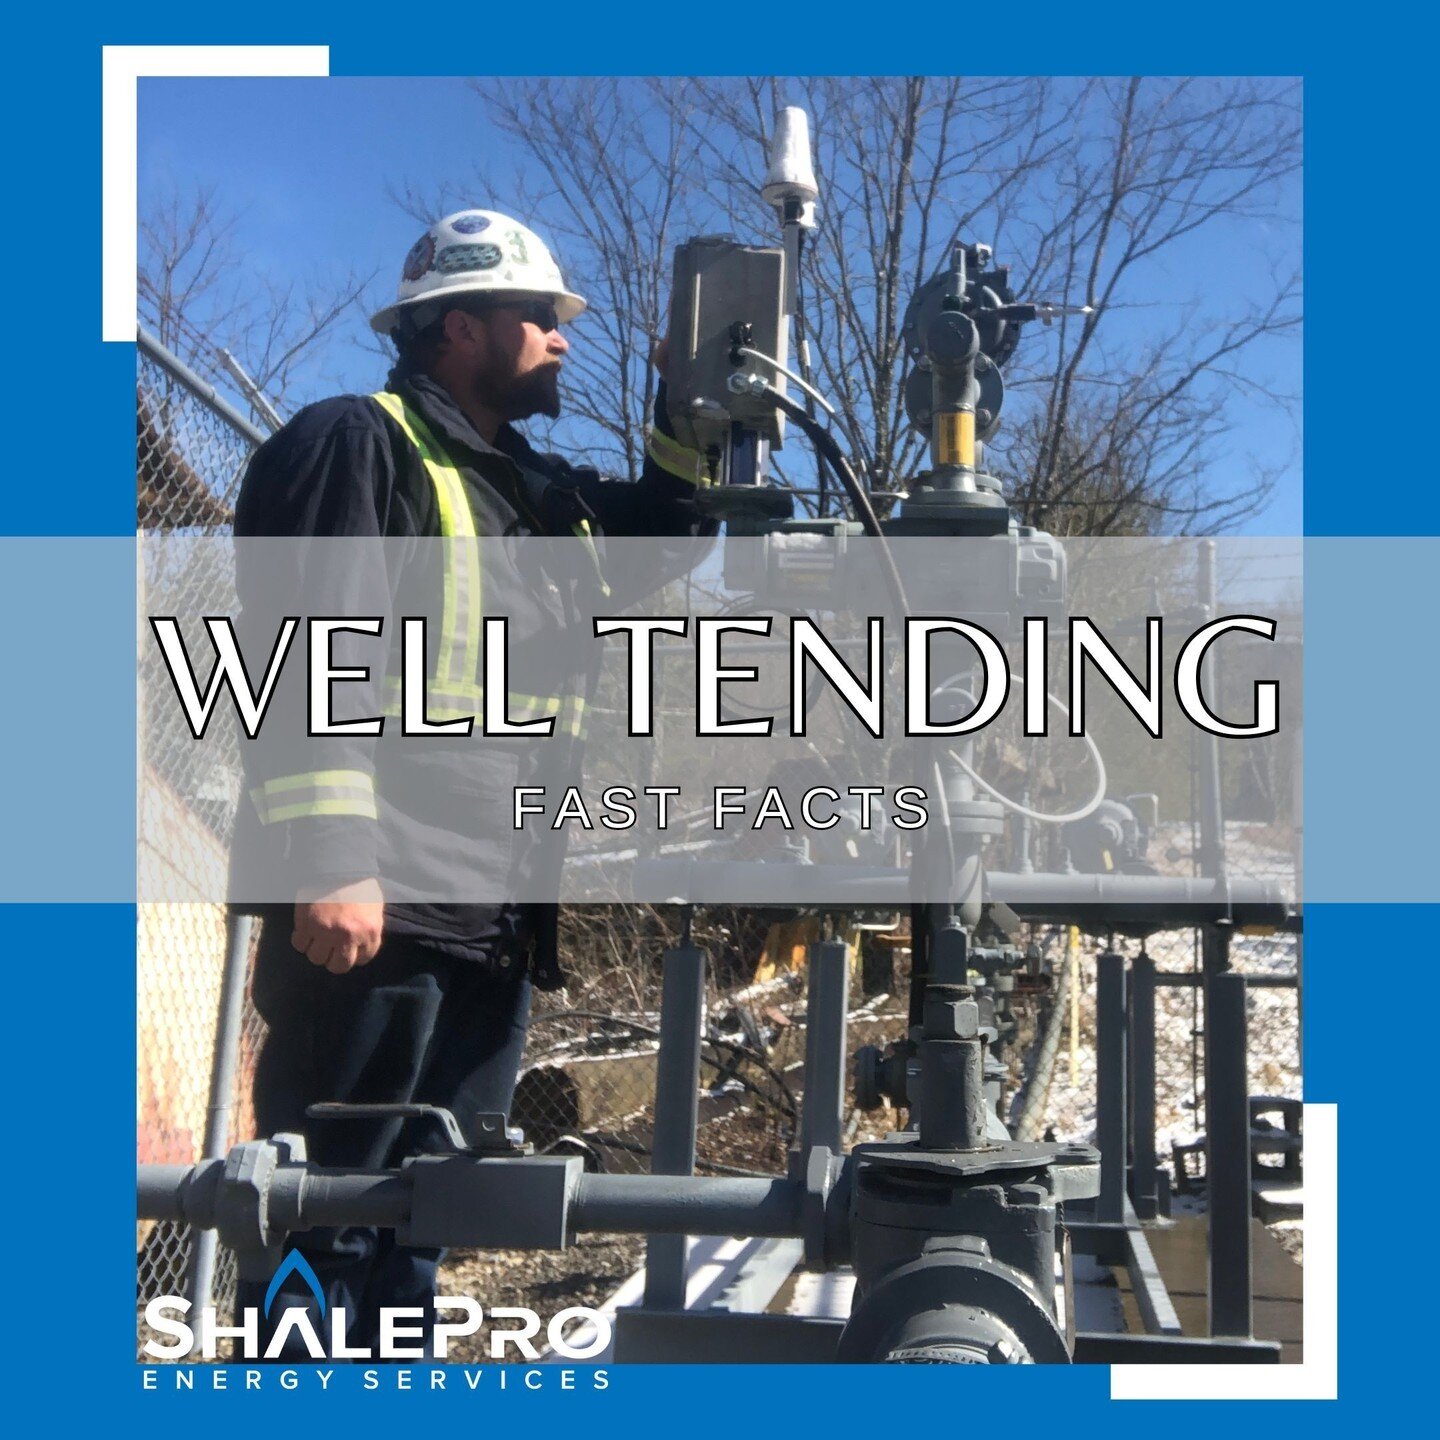 It's #FastFactFriday at ShalePro!

Our well tenders have experience with high pressure and high volume wells.
#GoWithThePro